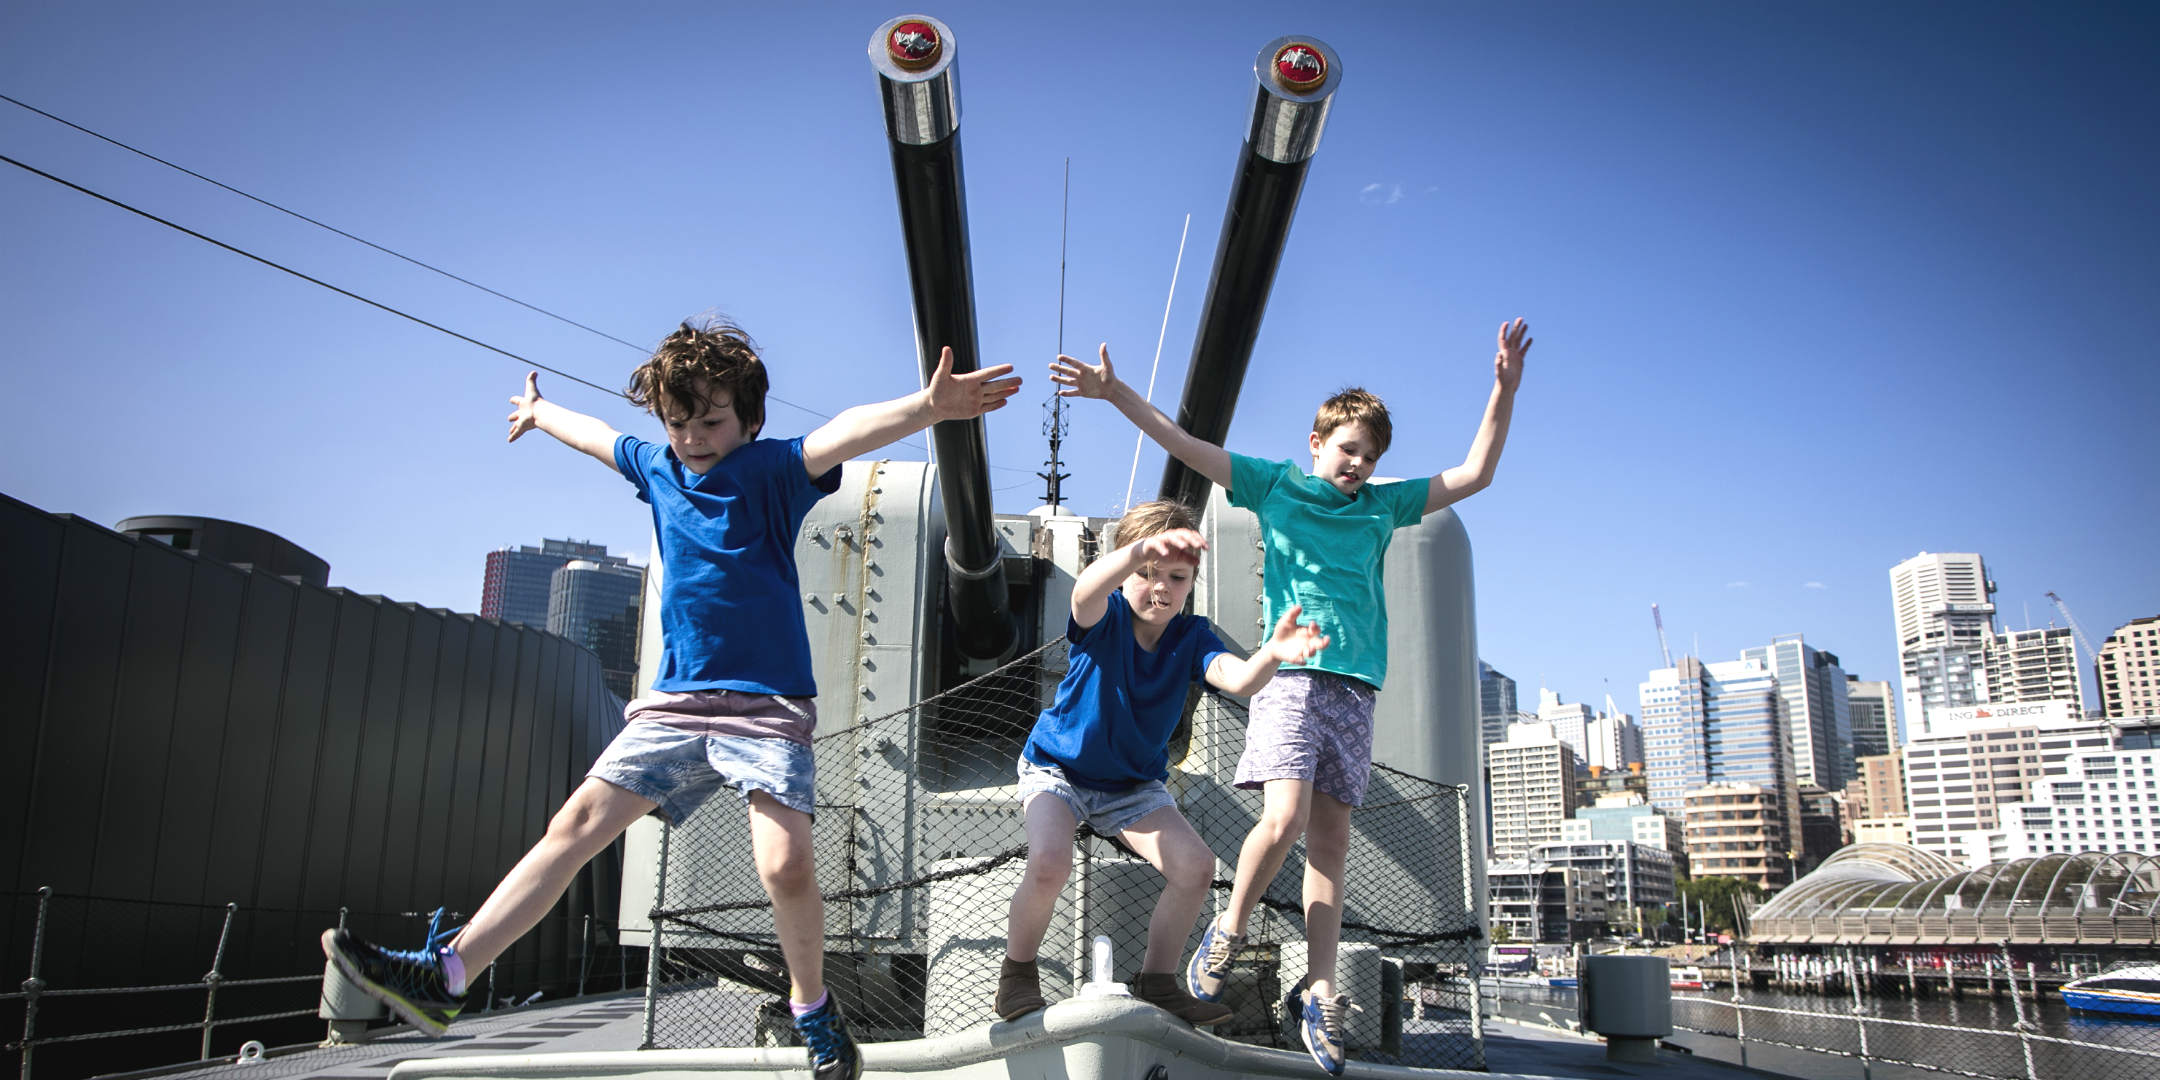 HMAS Vampire, Australia's largest museum vessel, is the last of the country's big gun ships.